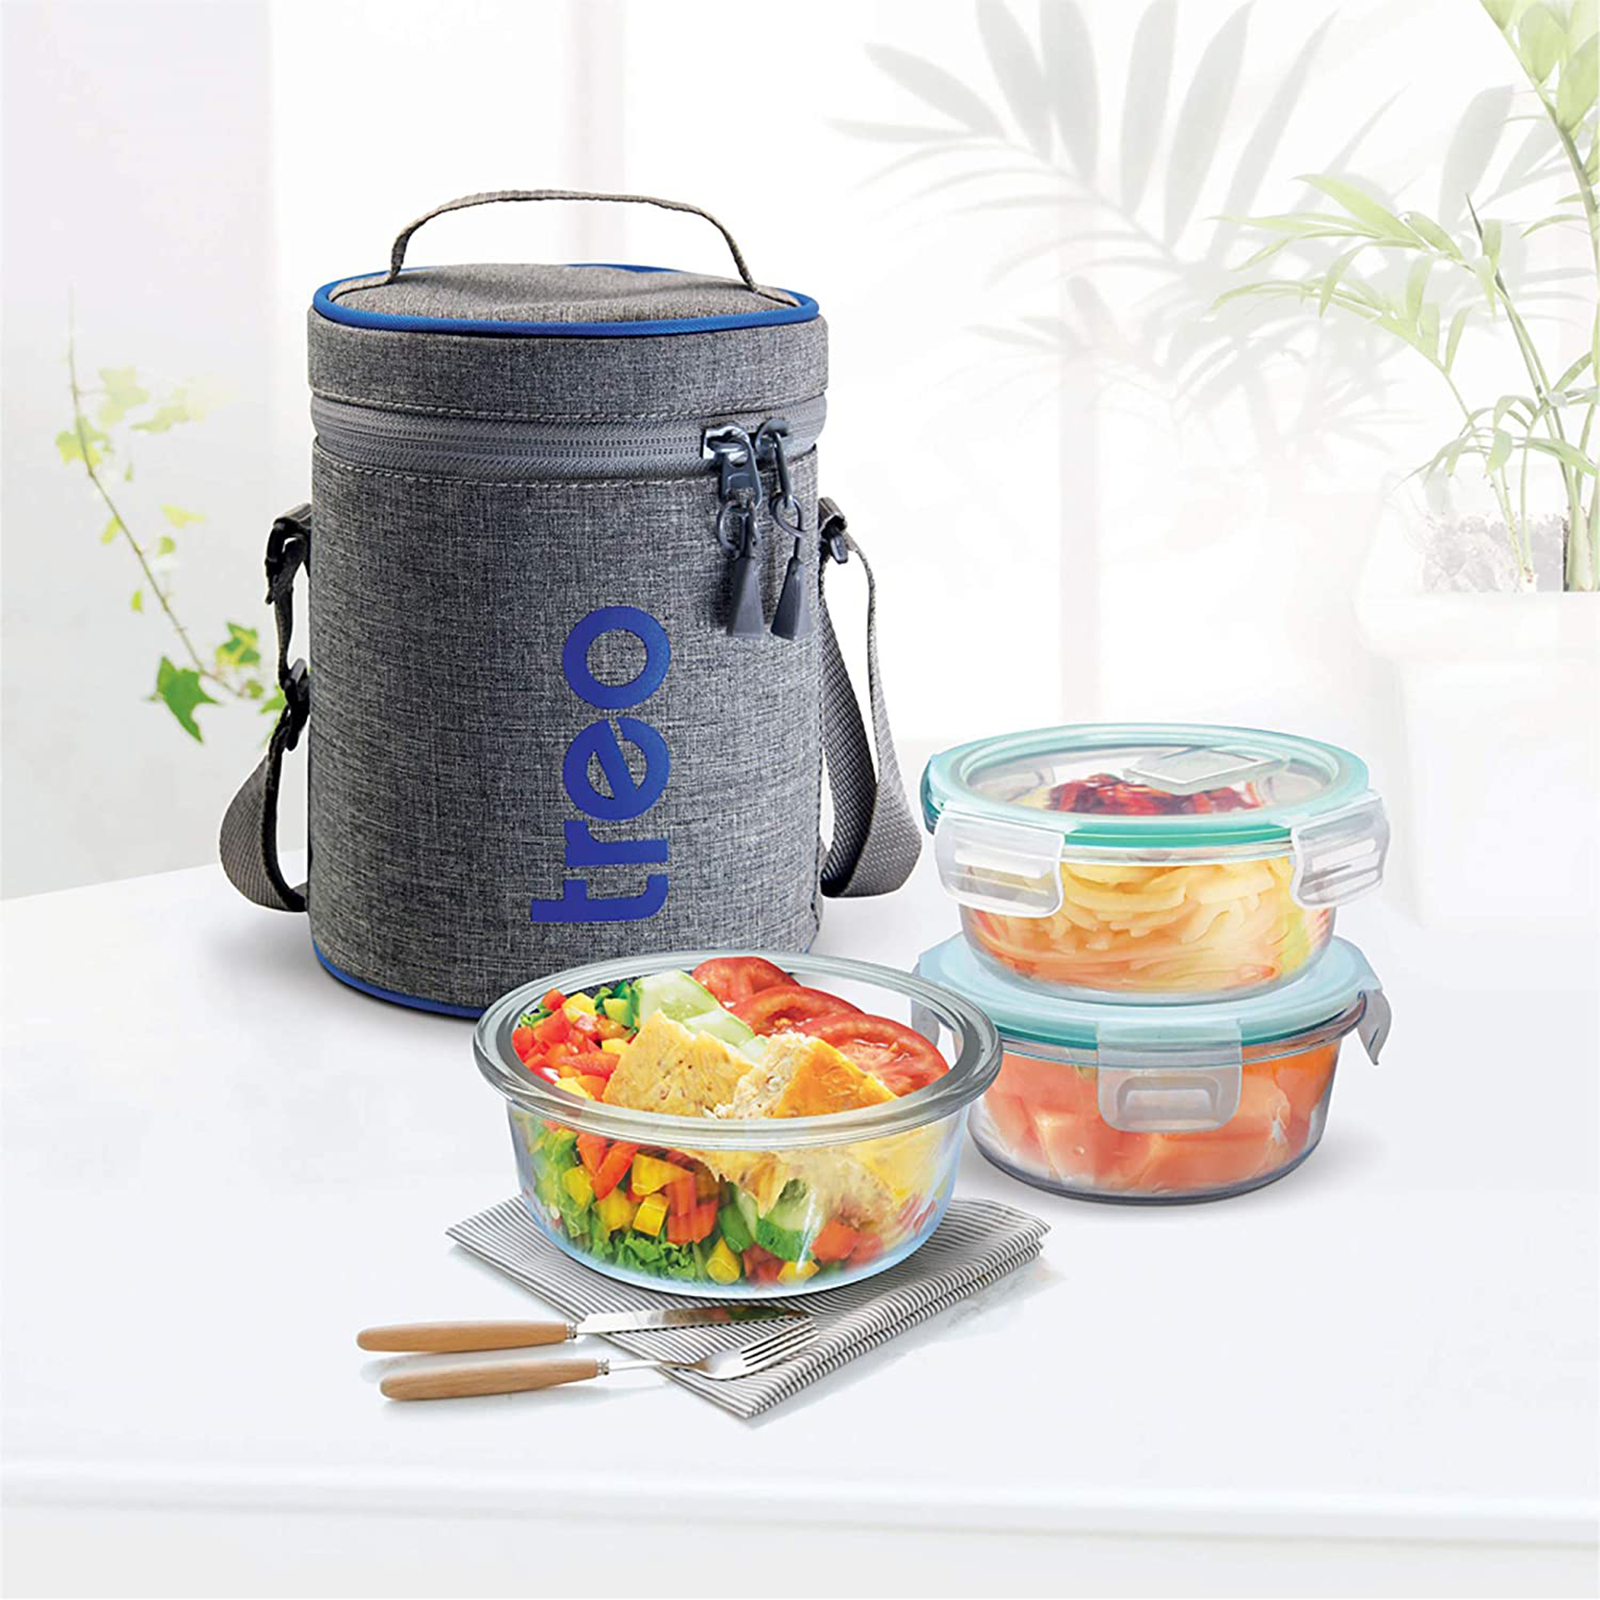 Glass Lunch Box Set of 3 400 Ml Round Microwave Safe office Tiffin Blue